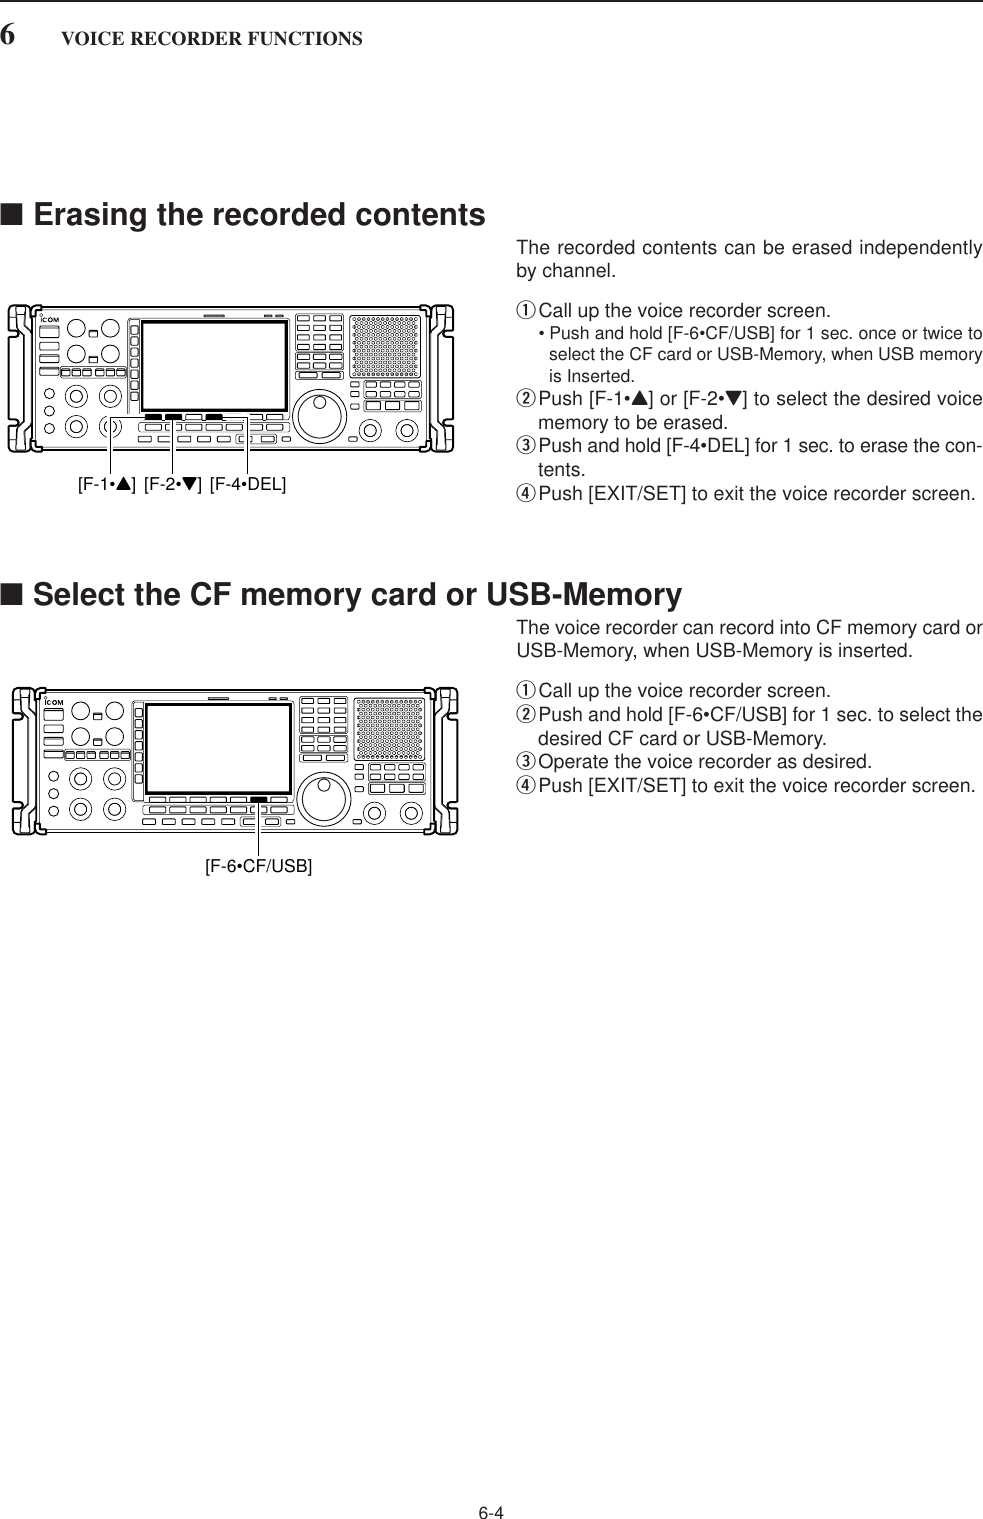 6-4■Erasing the recorded contentsThe recorded contents can be erased independentlyby channel.qCall up the voice recorder screen.• Push and hold [F-6•CF/USB] for 1 sec. once or twice toselect the CF card or USB-Memory, when USB memoryis Inserted.wPush [F-1•Y] or [F-2•Z] to select the desired voicememory to be erased.ePush and hold [F-4•DEL] for 1 sec. to erase the con-tents.rPush [EXIT/SET] to exit the voice recorder screen.■Select the CF memory card or USB-MemoryThe voice recorder can record into CF memory card orUSB-Memory, when USB-Memory is inserted.qCall up the voice recorder screen.wPush and hold [F-6•CF/USB] for 1 sec. to select thedesired CF card or USB-Memory.eOperate the voice recorder as desired.rPush [EXIT/SET] to exit the voice recorder screen.[F-6•CF/USB][F-1•Y] [F-2•Z] [F-4•DEL]6VOICE RECORDER FUNCTIONS